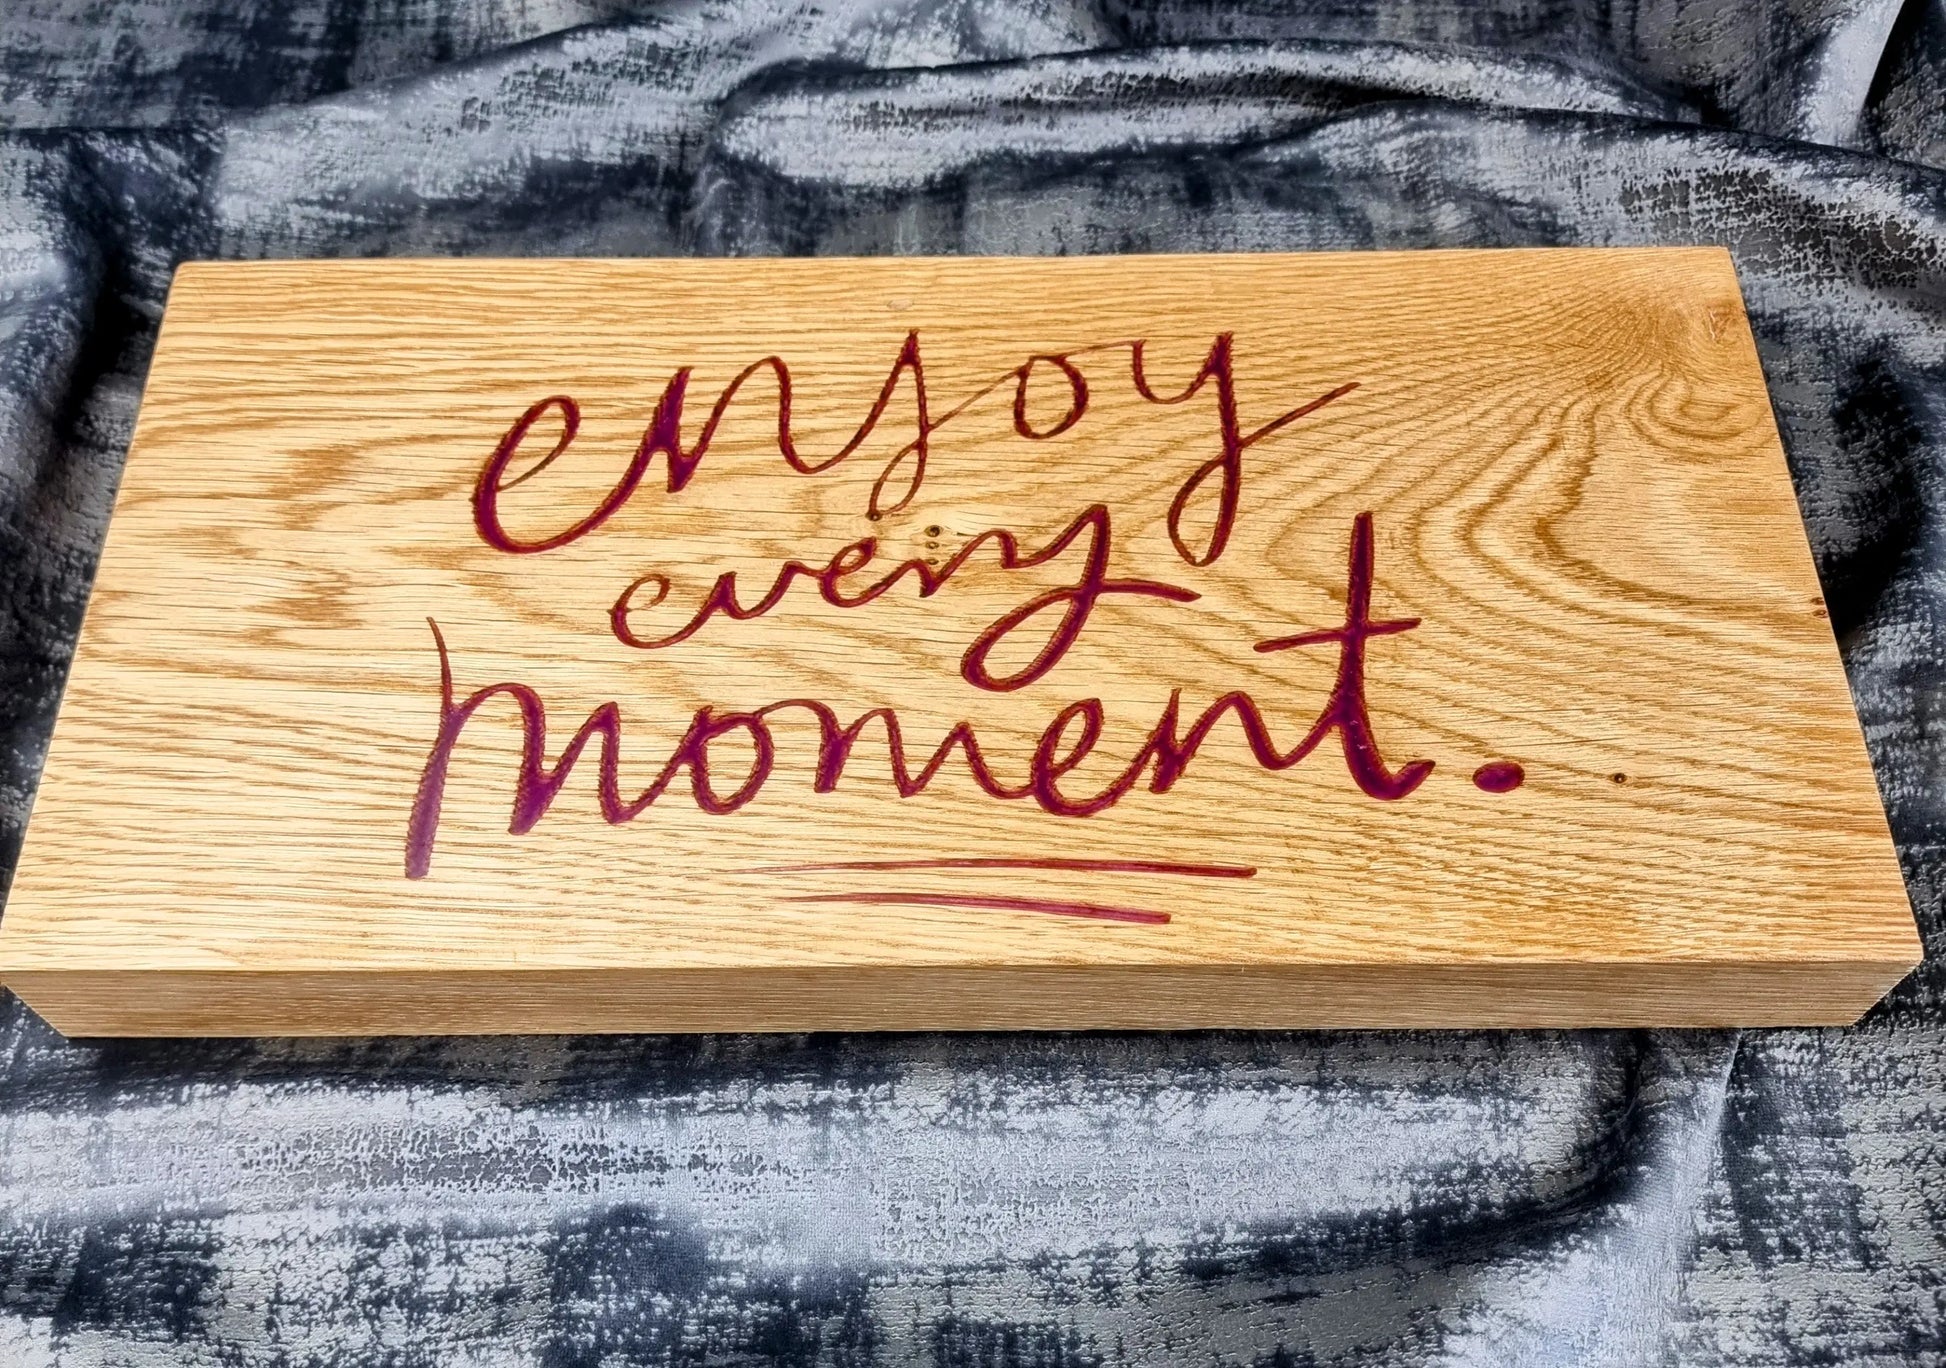 Sofa Boards made from Ash wood with slogans wisteria woodcraft